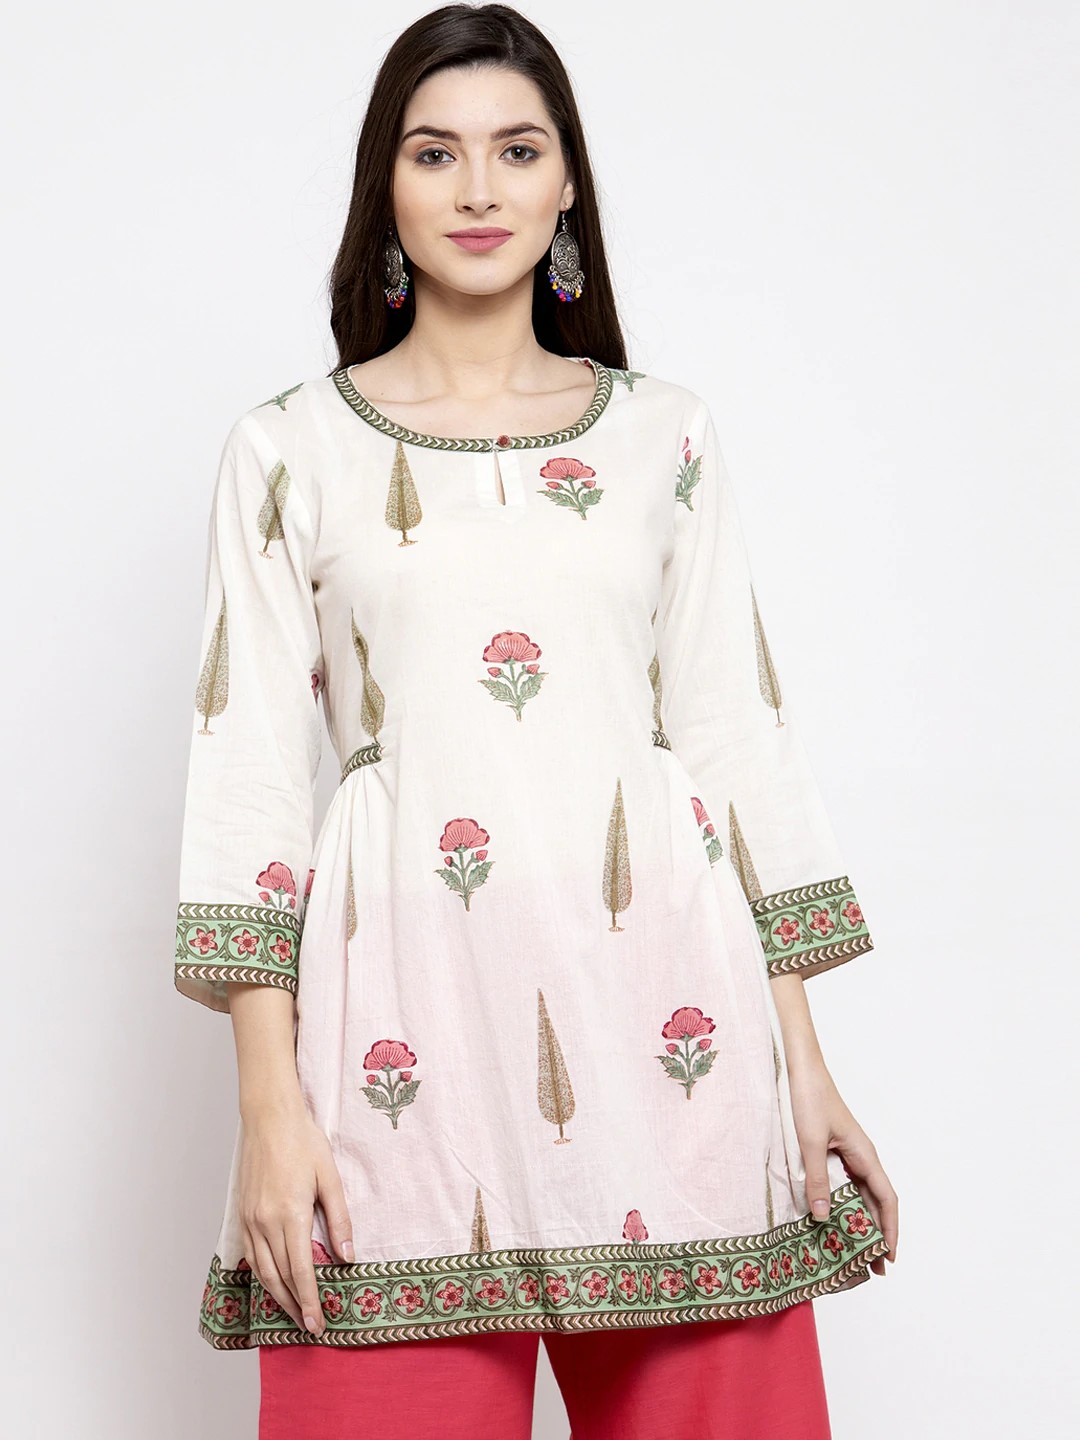 Women's  Off-White & Green Printed Tunic - Wahe-NOOR